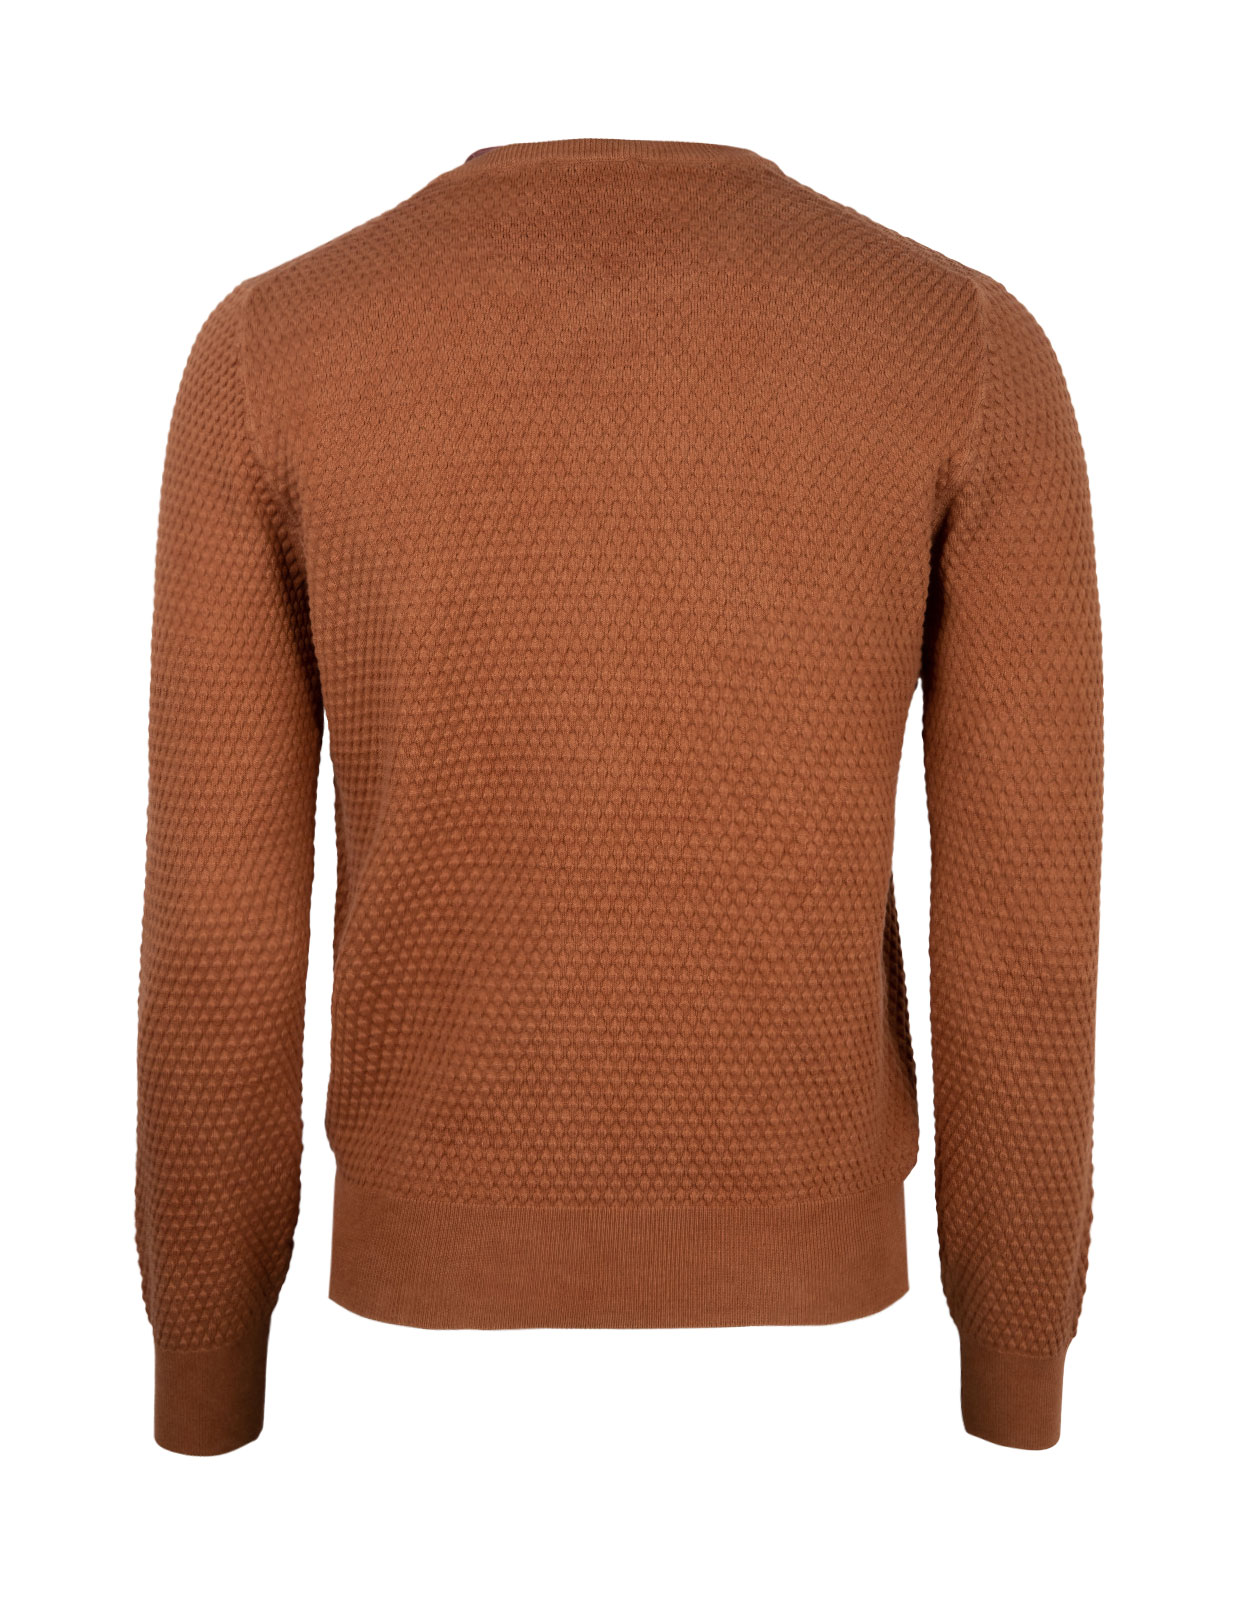 Crew Neck Knitted Texture Cotton Tobacco Stl 48